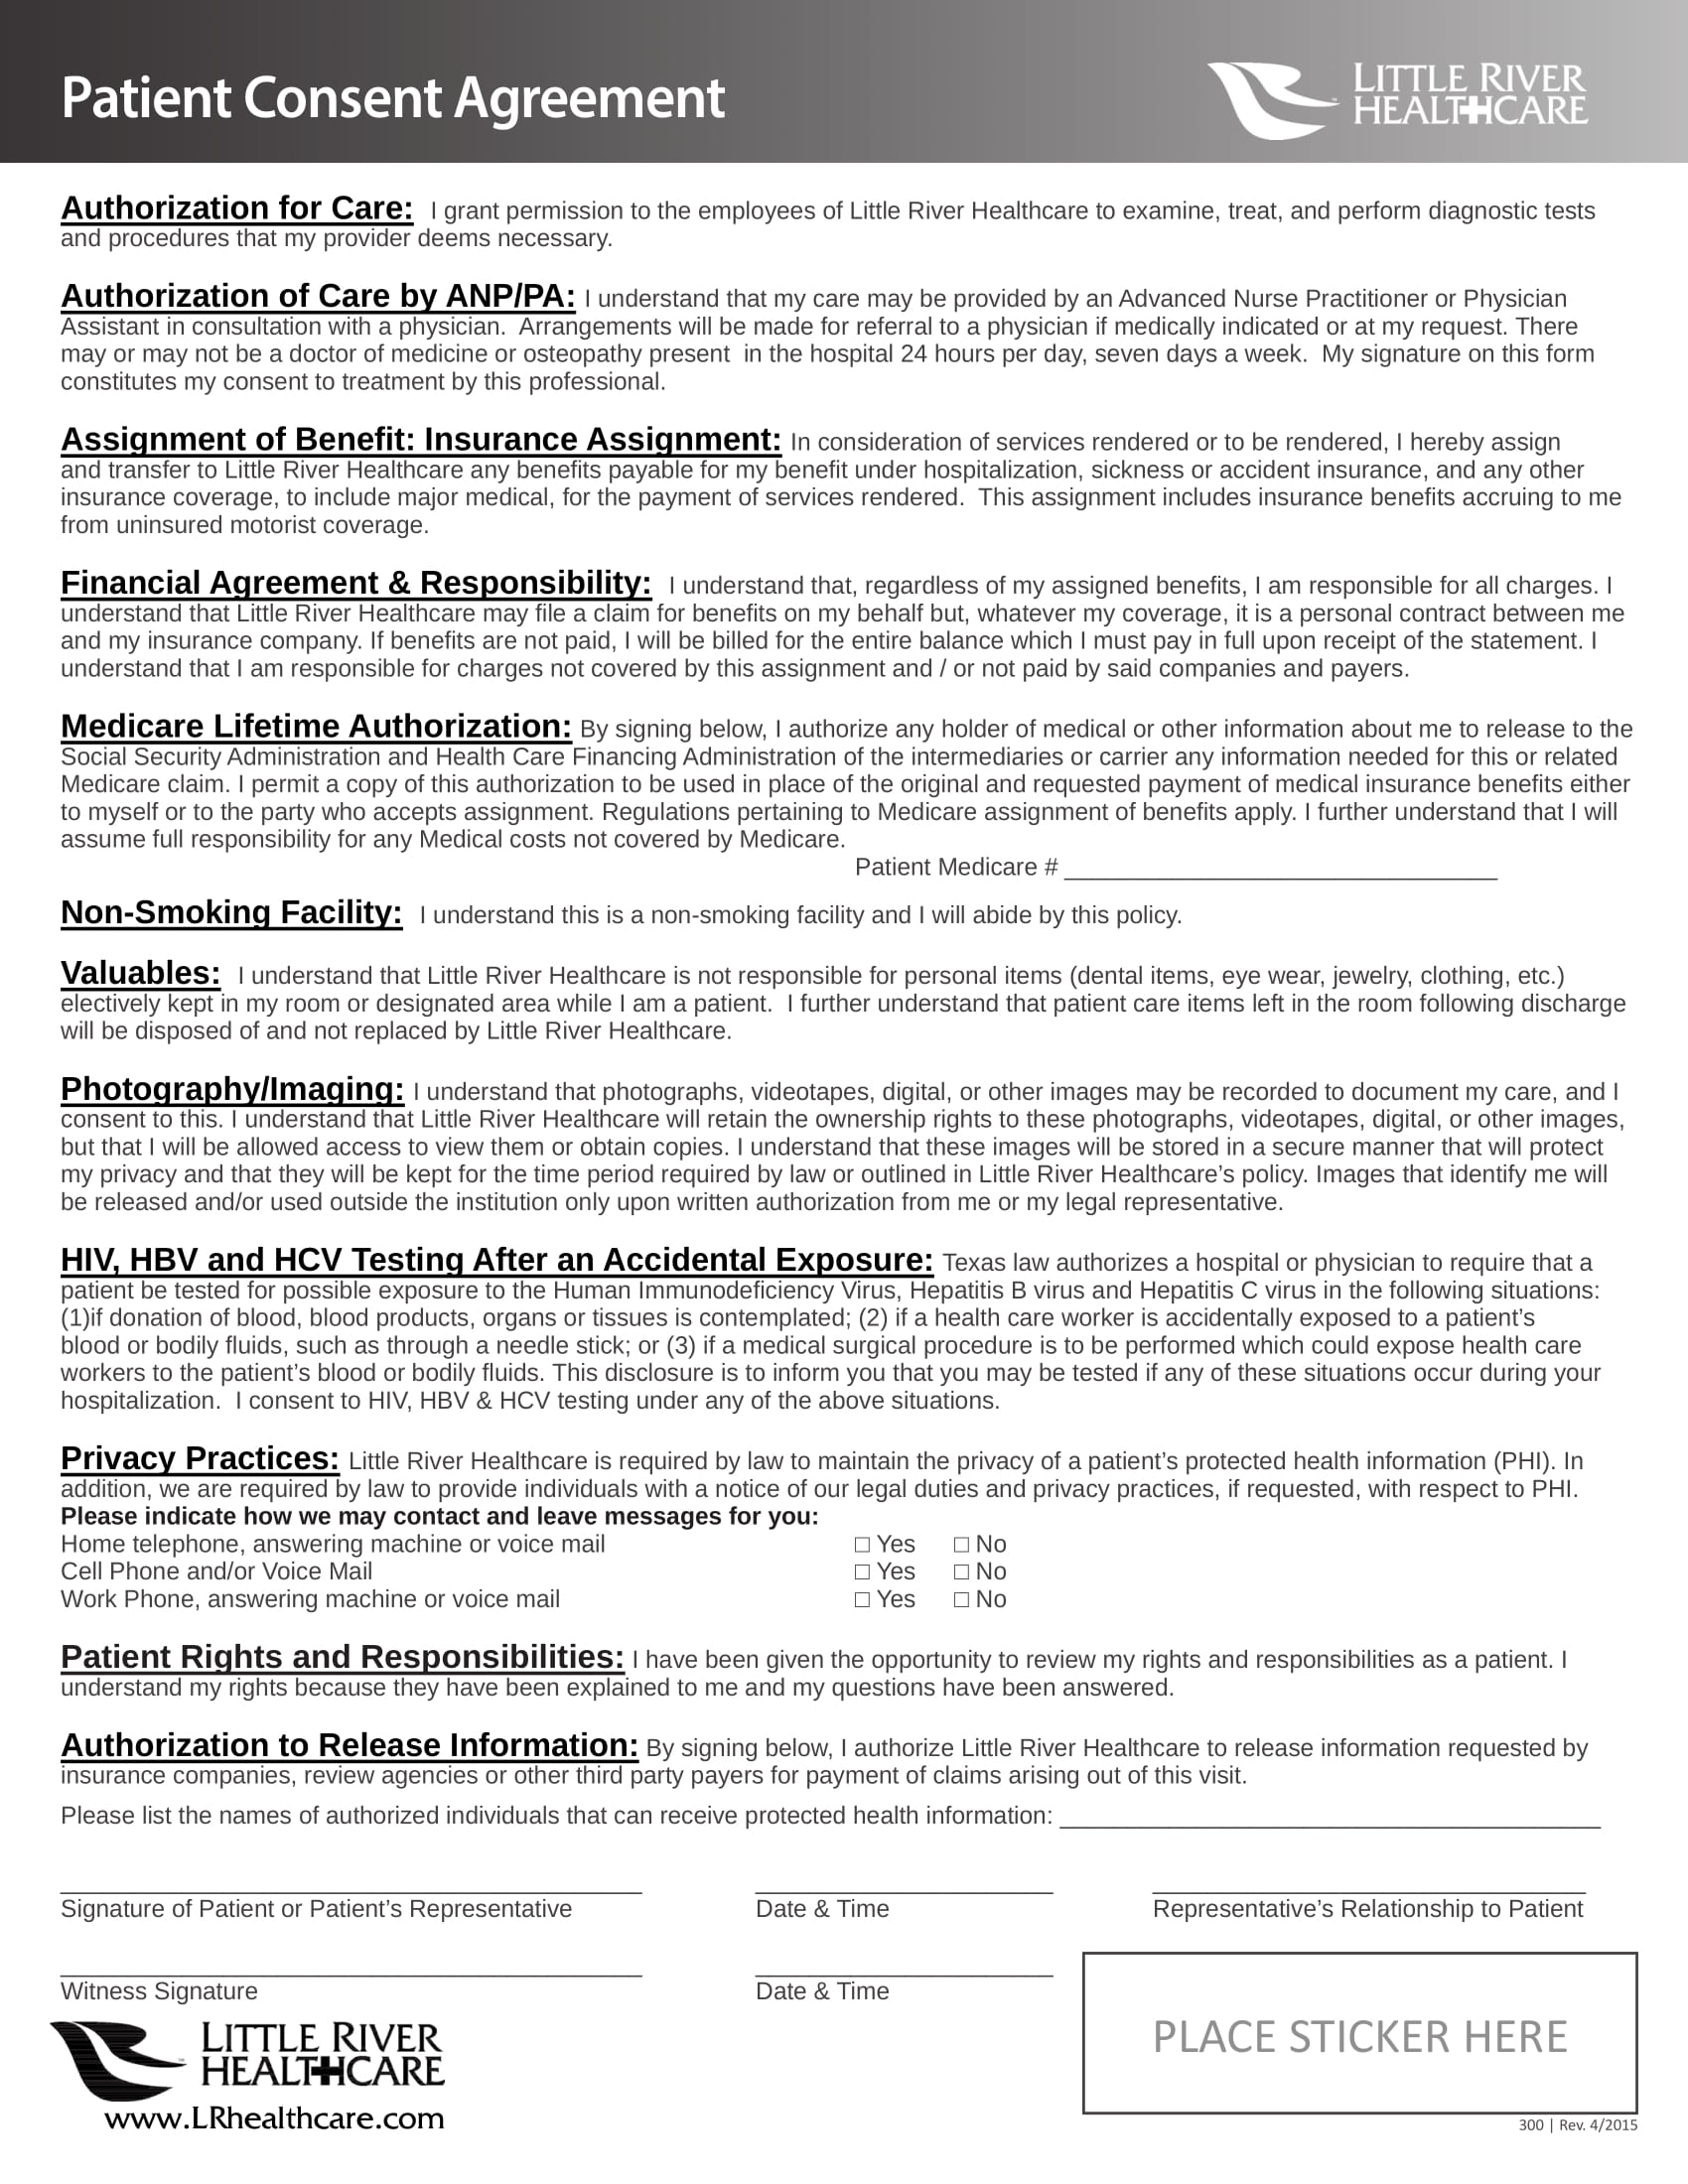 patient consent agreement contract form 1